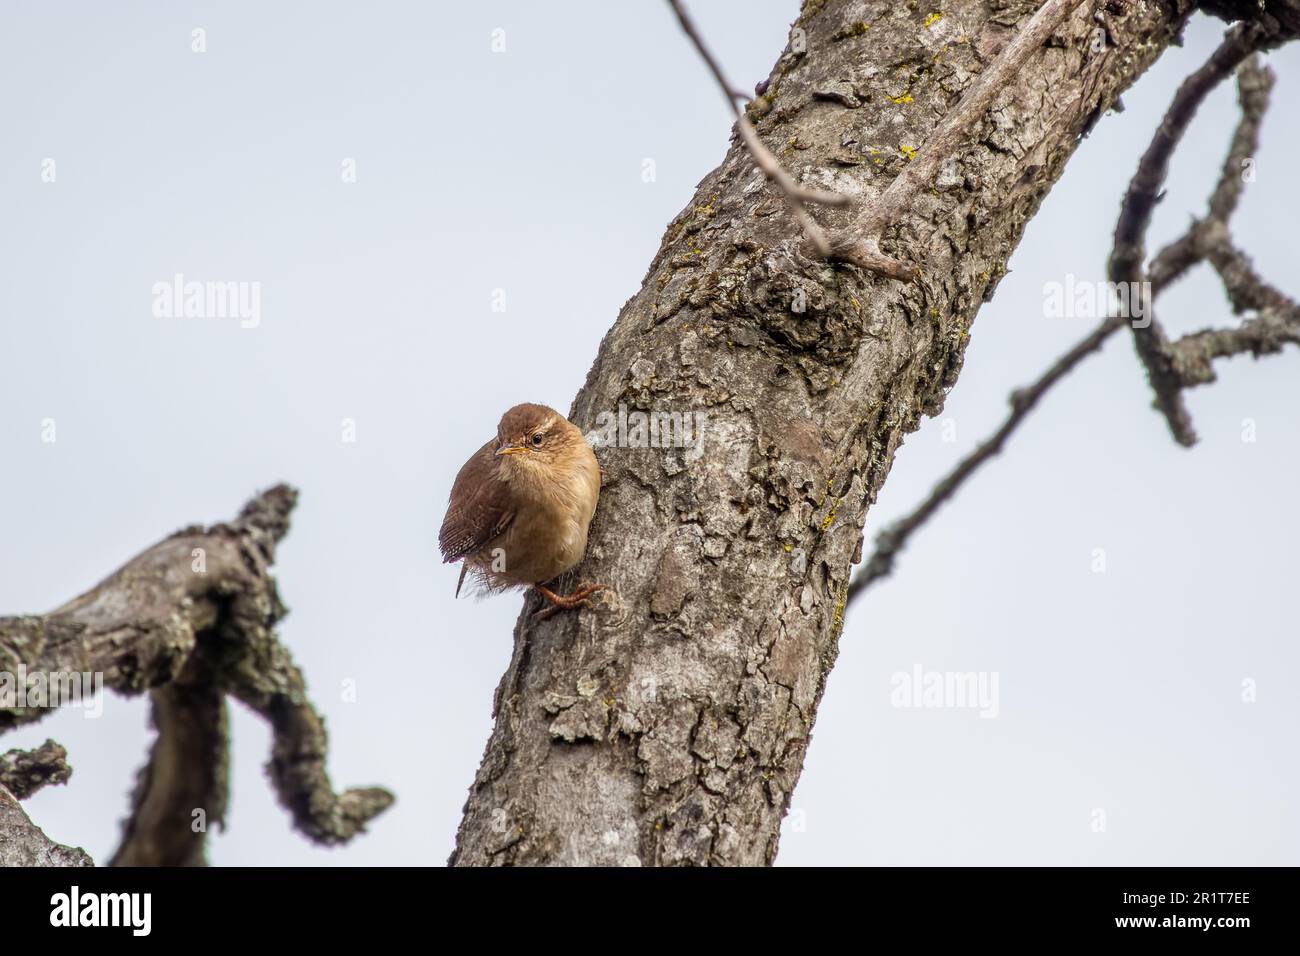 wren small bird perched on the trunk of a tree with sky in the background Stock Photo